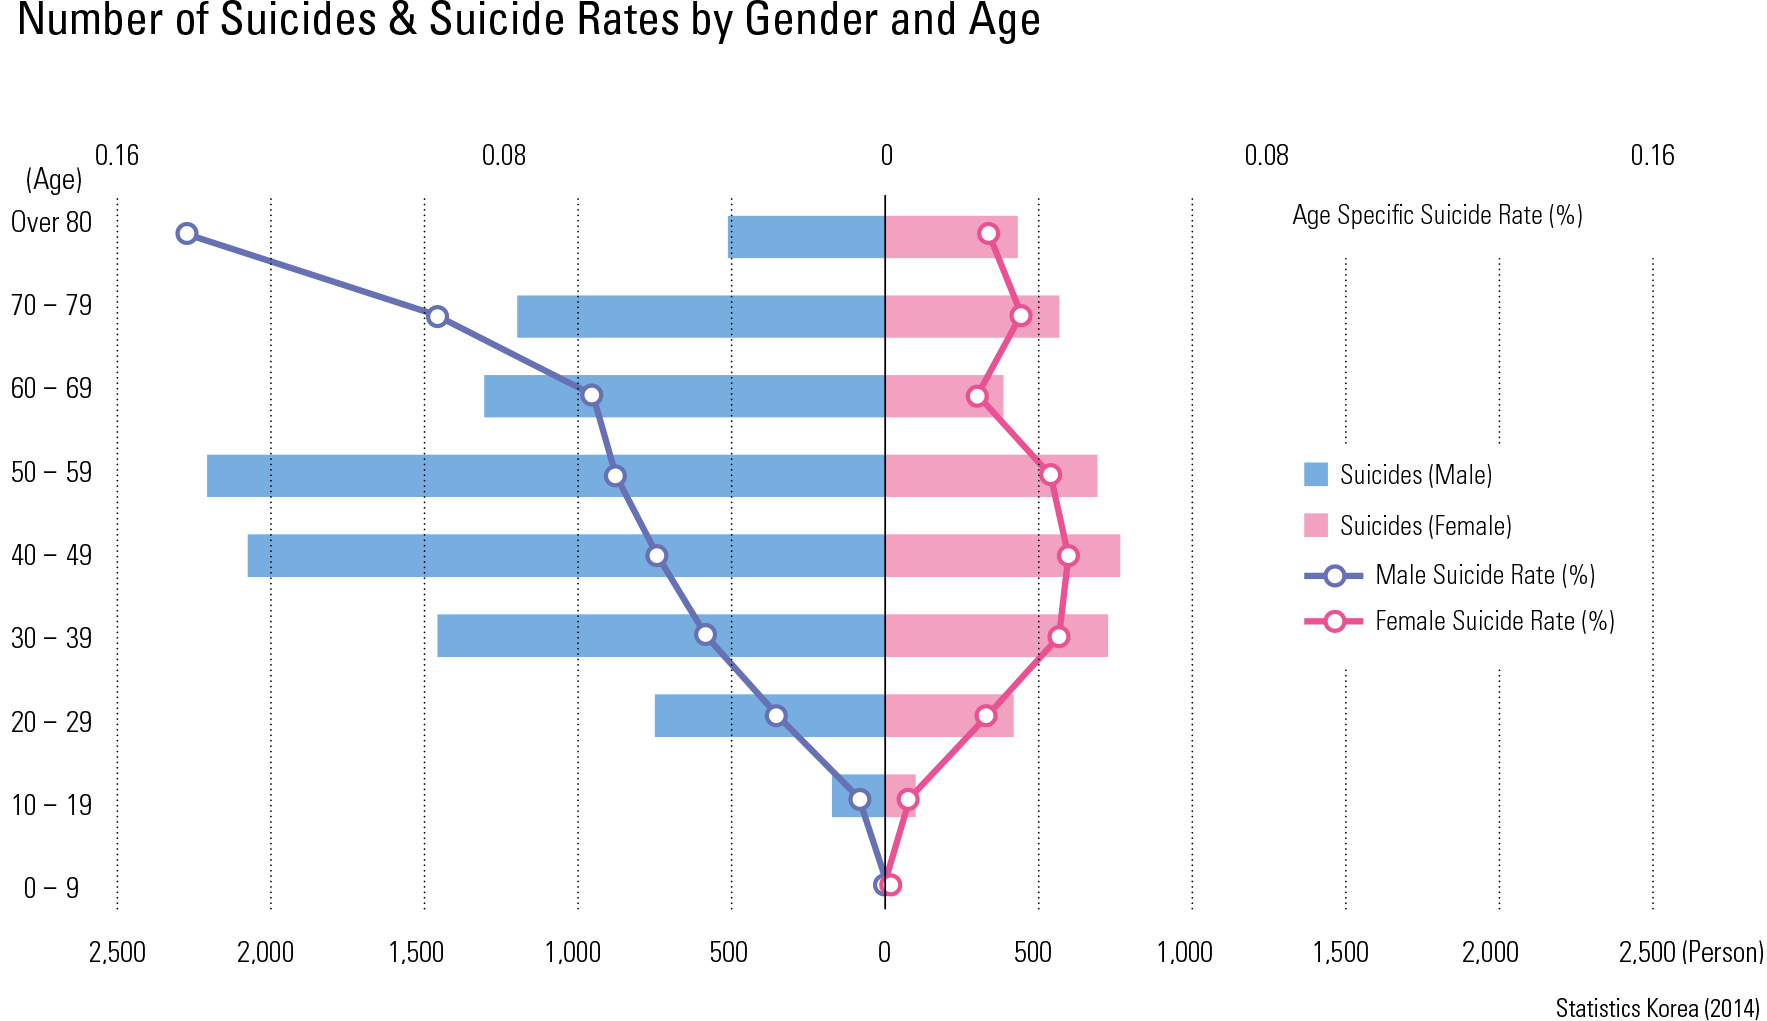 Number of Suicides & Suicide Rates by Gender and Age<p class="oz_zoom" zimg="http://imagedata.cafe24.com/us_3/us3_97-2_2.jpg"><span style="font-family:Nanum Myeongjo;"><span style="font-size:18px;"><span class="label label-danger">UPDATE DATA</span></span></p>